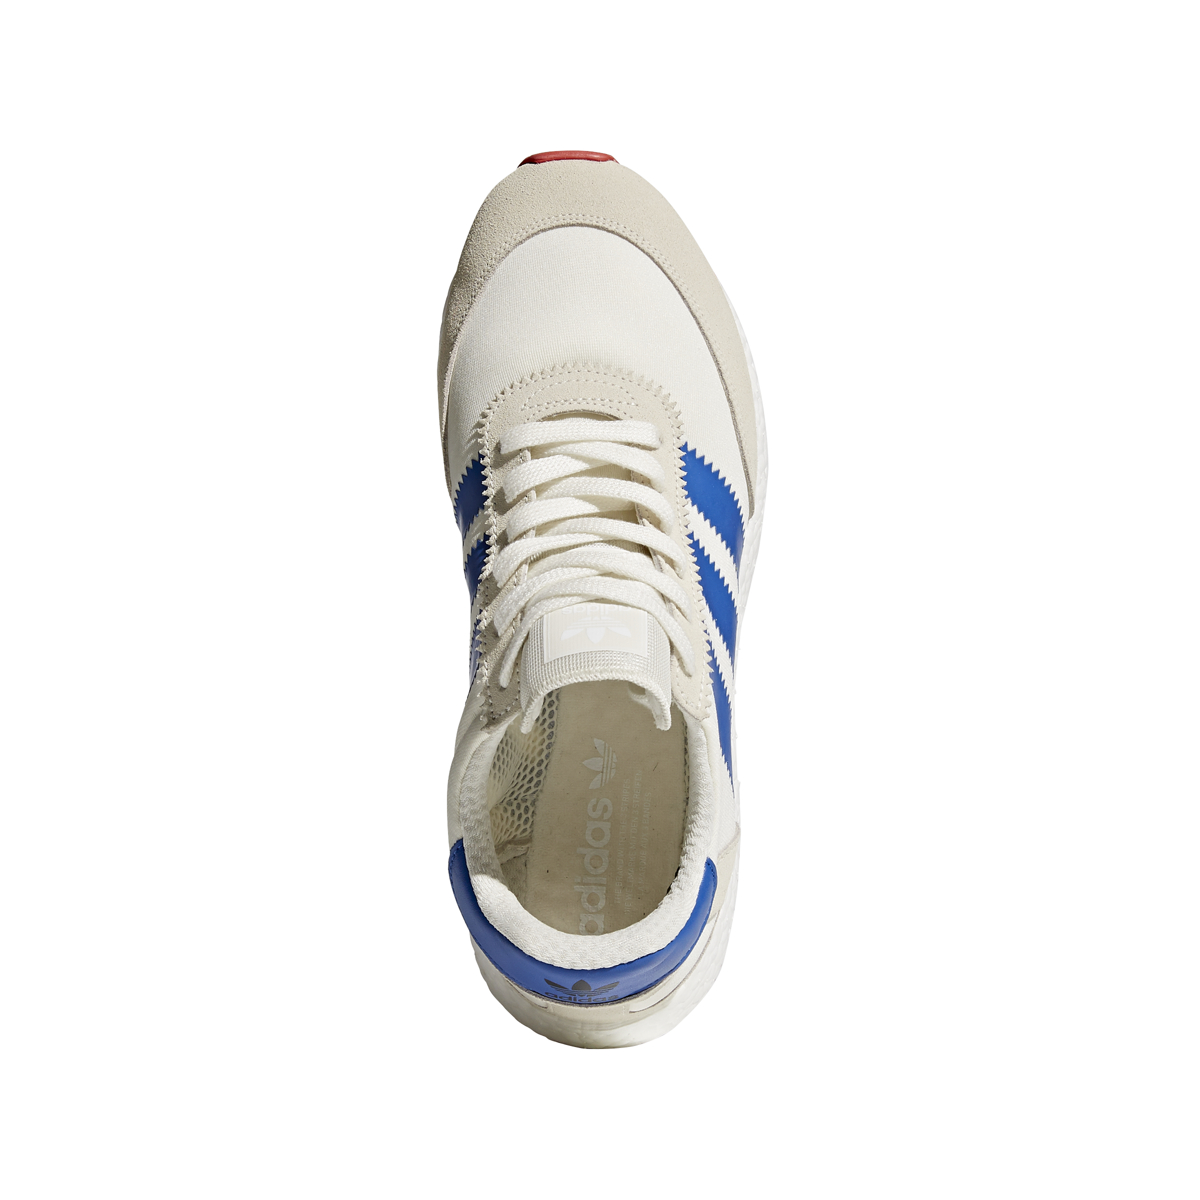 Adidas I-5923 "Pride Of The White/Blue/Core Red)